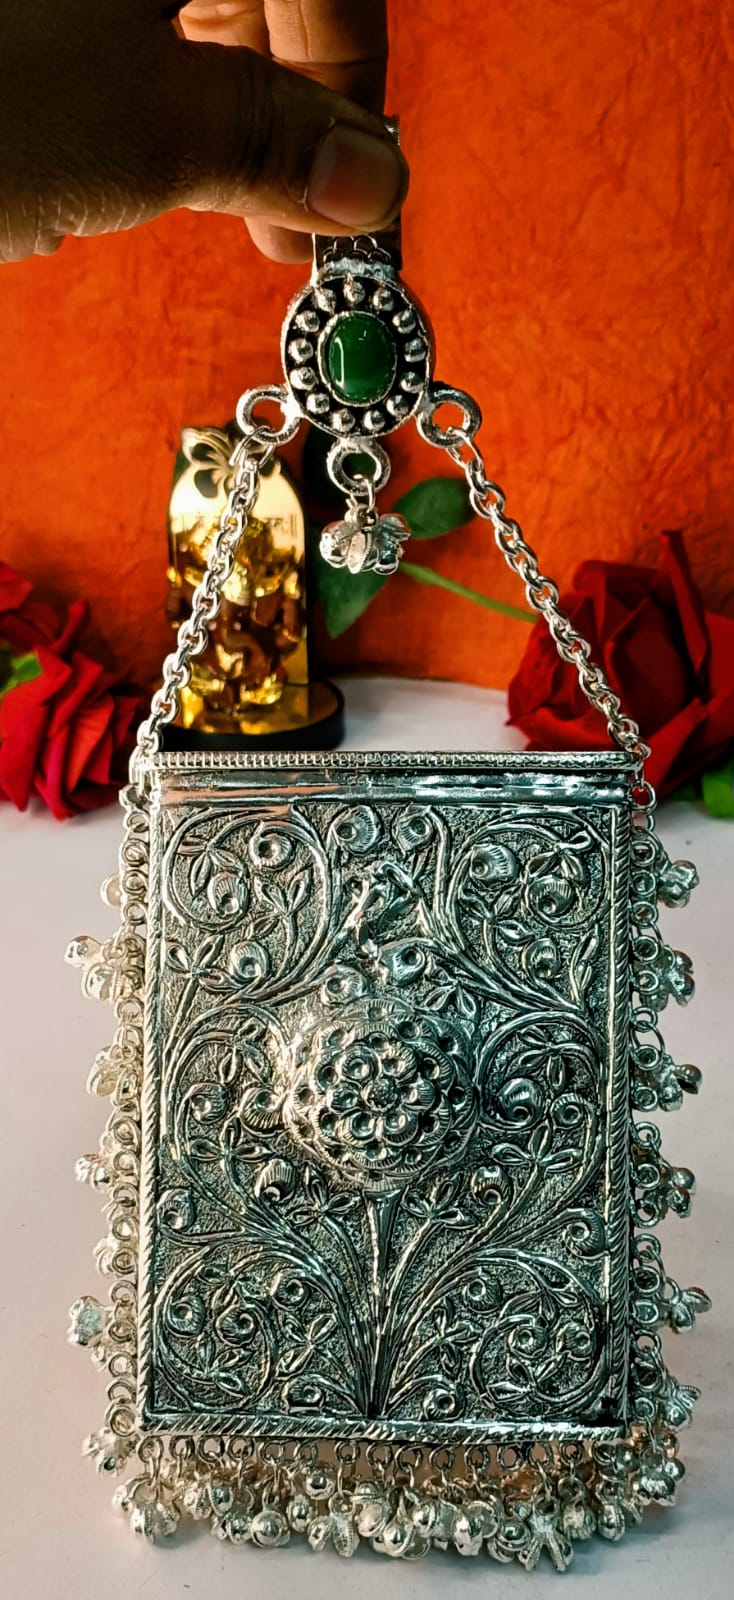 German Silver Moti Hand Purse at Rs 1000/piece | Indore | ID: 25975538862